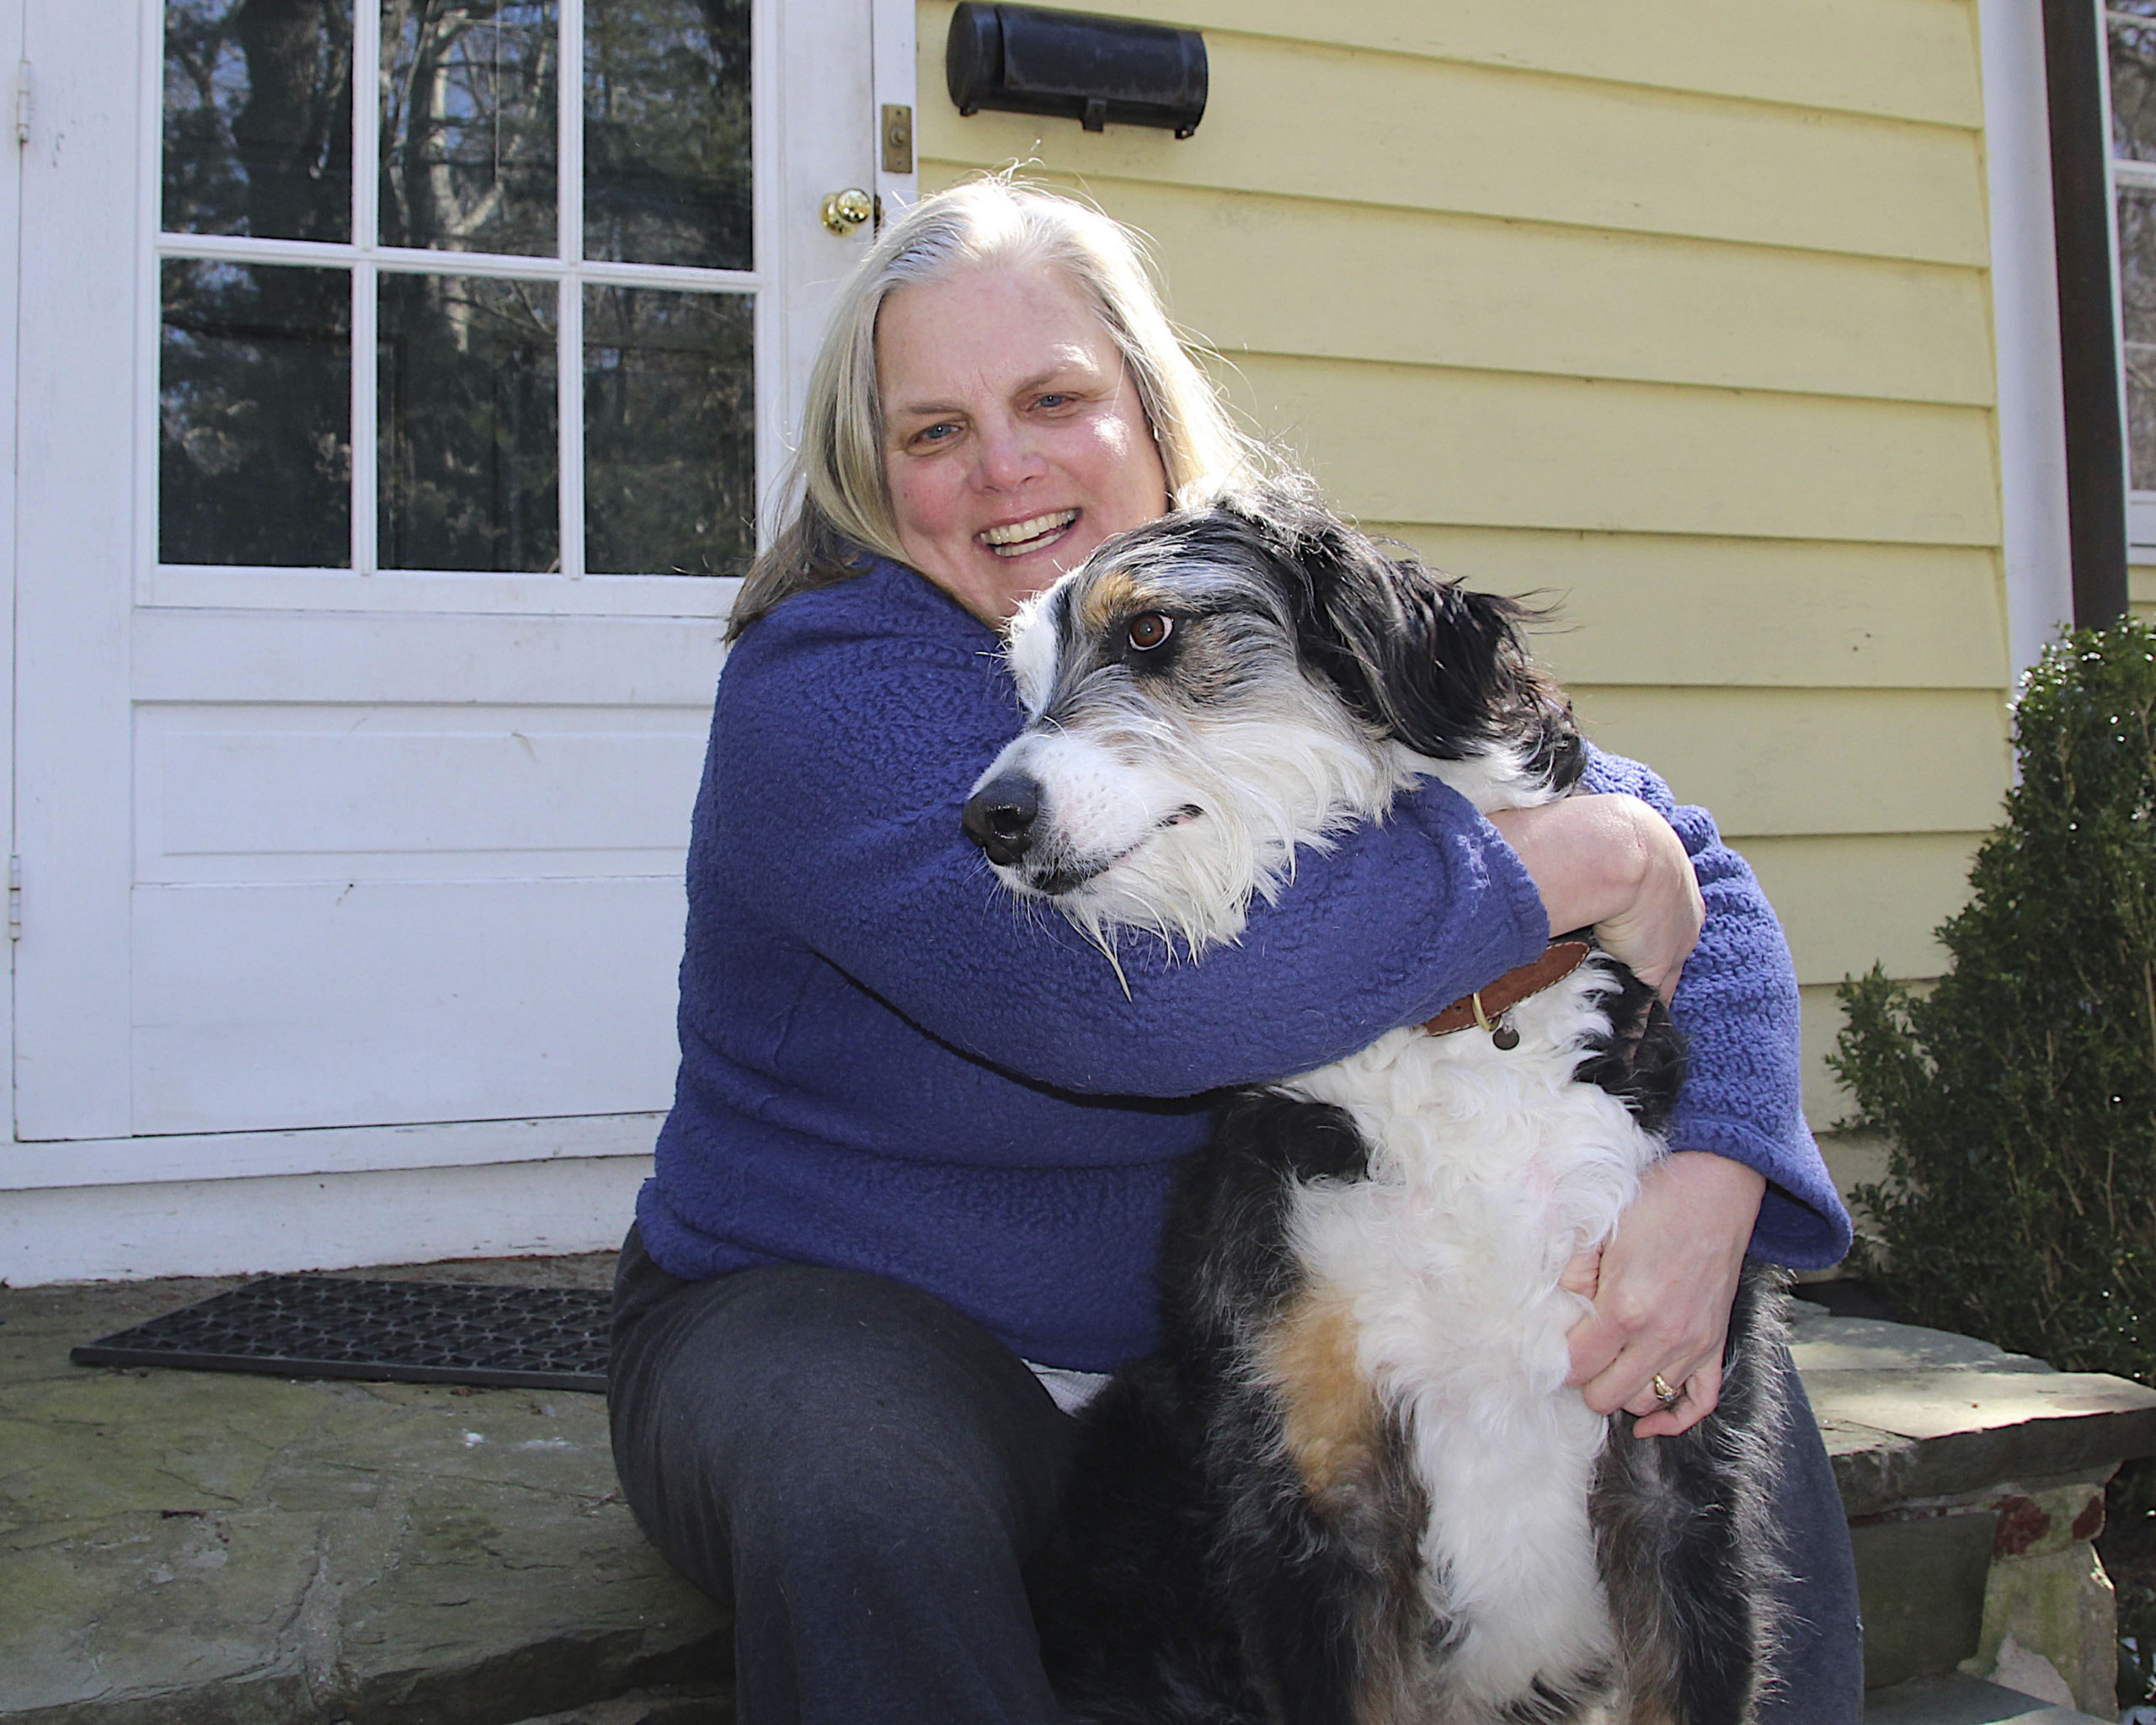 Doggy Day Care Can Continue
March 6 -- Lori Marsden was allowed to continue to run a doggy day care business from her East Hampton home after the Town Zoning Board of Appeals overturned a decision by the building inspector that said it was not permitted in a residential area. The business owner's attorney had argued that closing down the popular doggy care enterprise could have a chilling effect on similar home businesses.